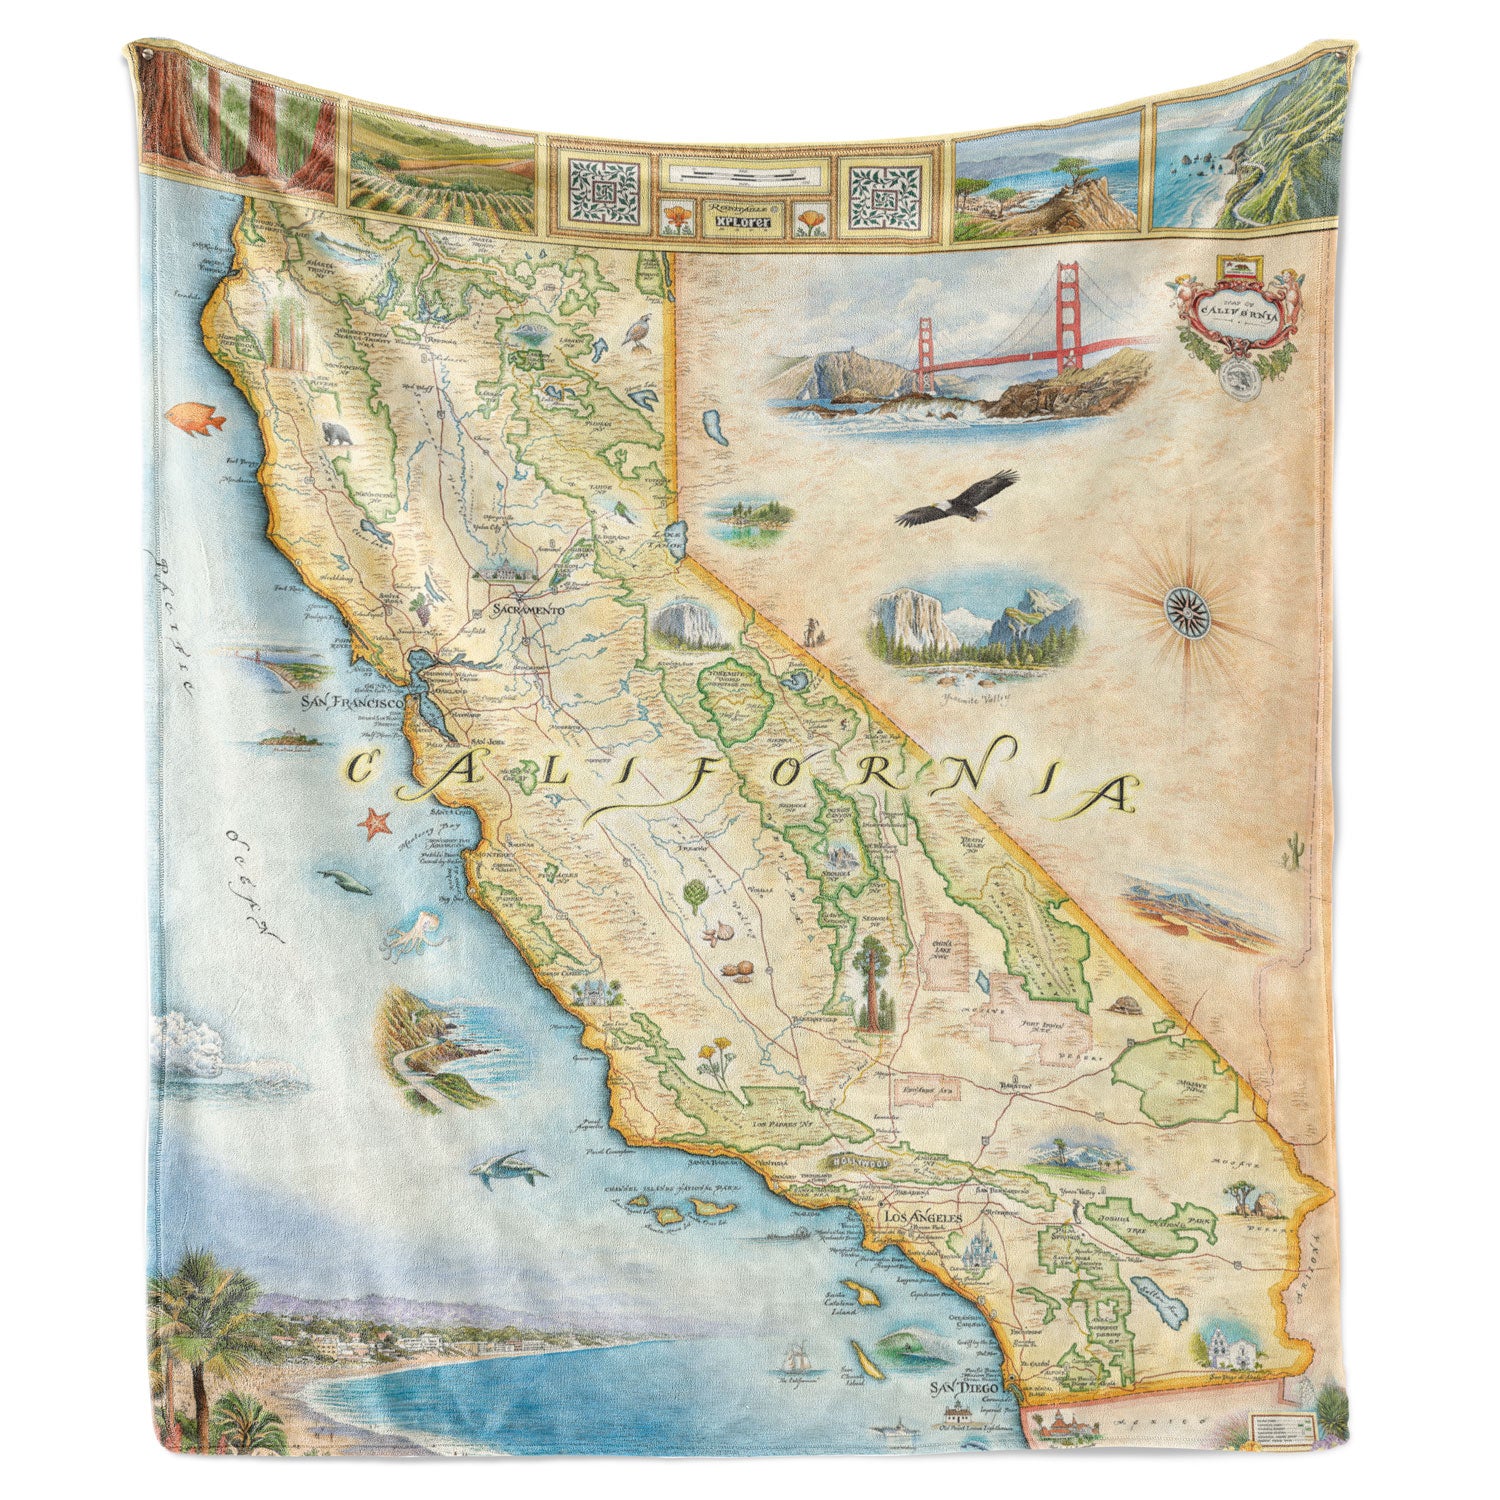 Hanging California State Map Fleece Blanket in earth-tones. It features major cities of Sacramento, San Francisco, Los Angeles, San Diego, Hollywood, and more. Aquatic life such as whales, sea turtles, and an abundance of fish species. National Parks and attractions are also illustrated such as Yosemite, Sequoia Disneyland, Redwood Forest, Golden Gate Bridge and Death Valley. 